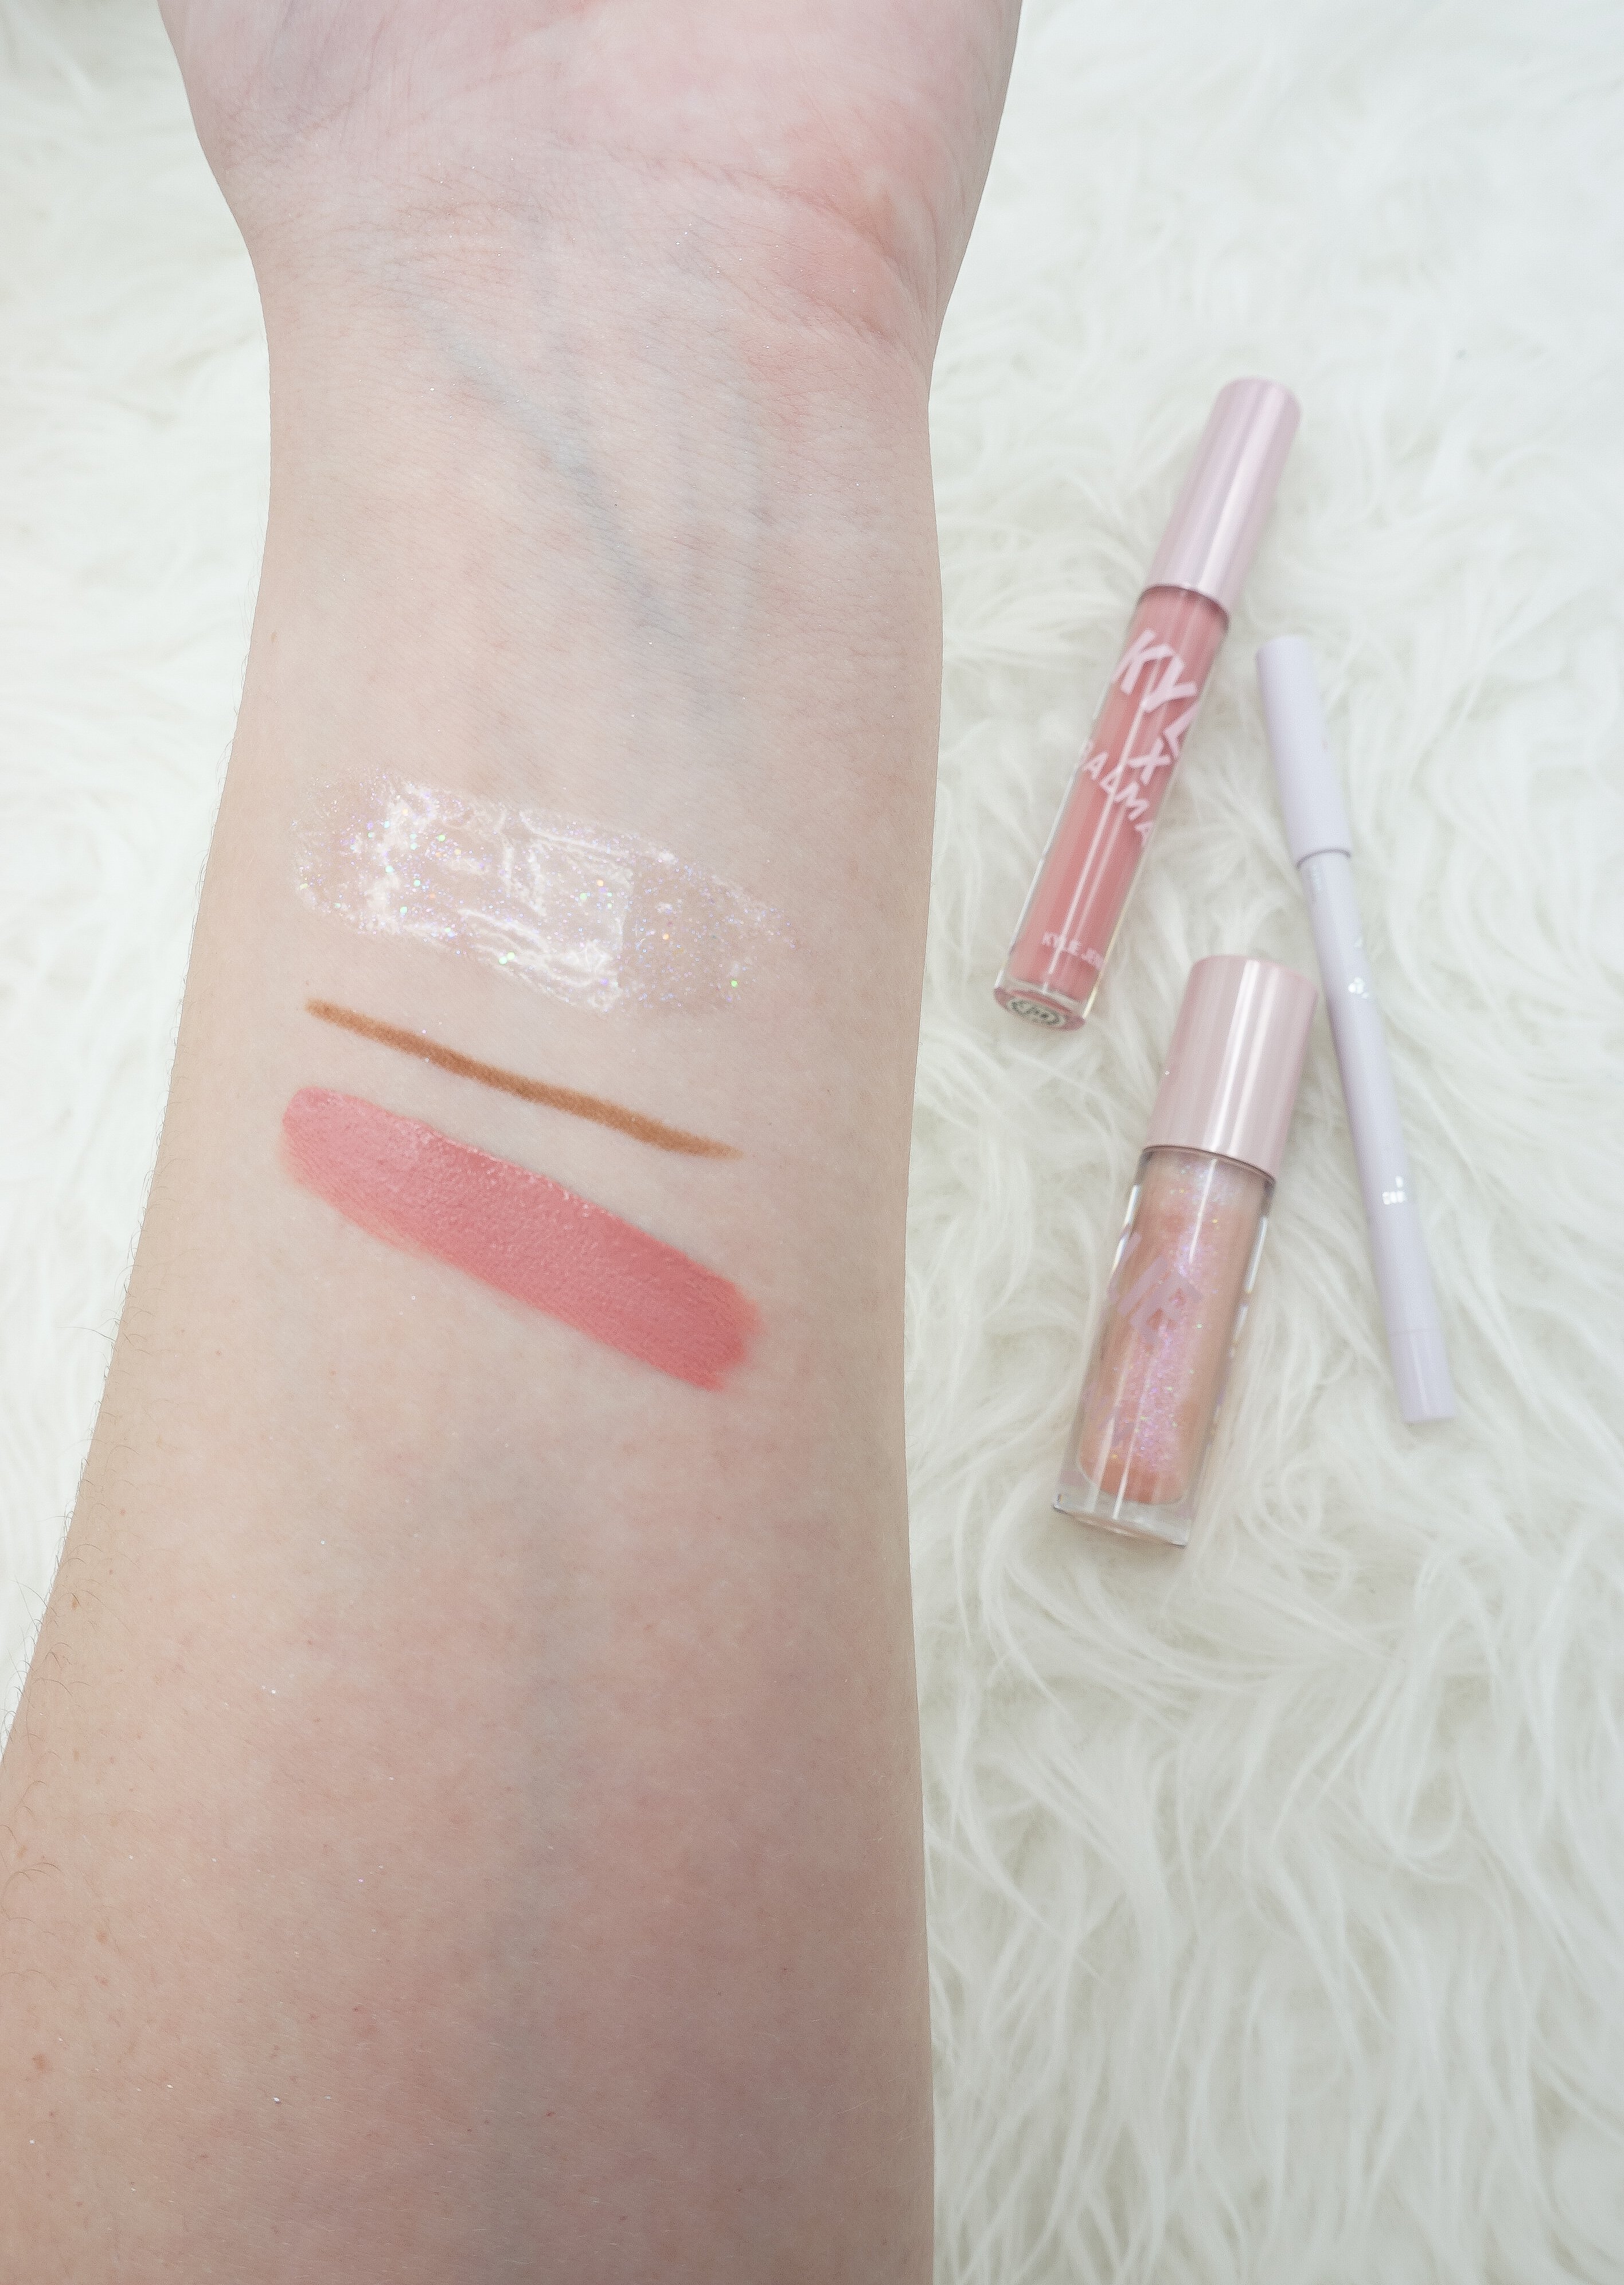 Kylie Cosmetics x Balmain Collection | Review and Swatches